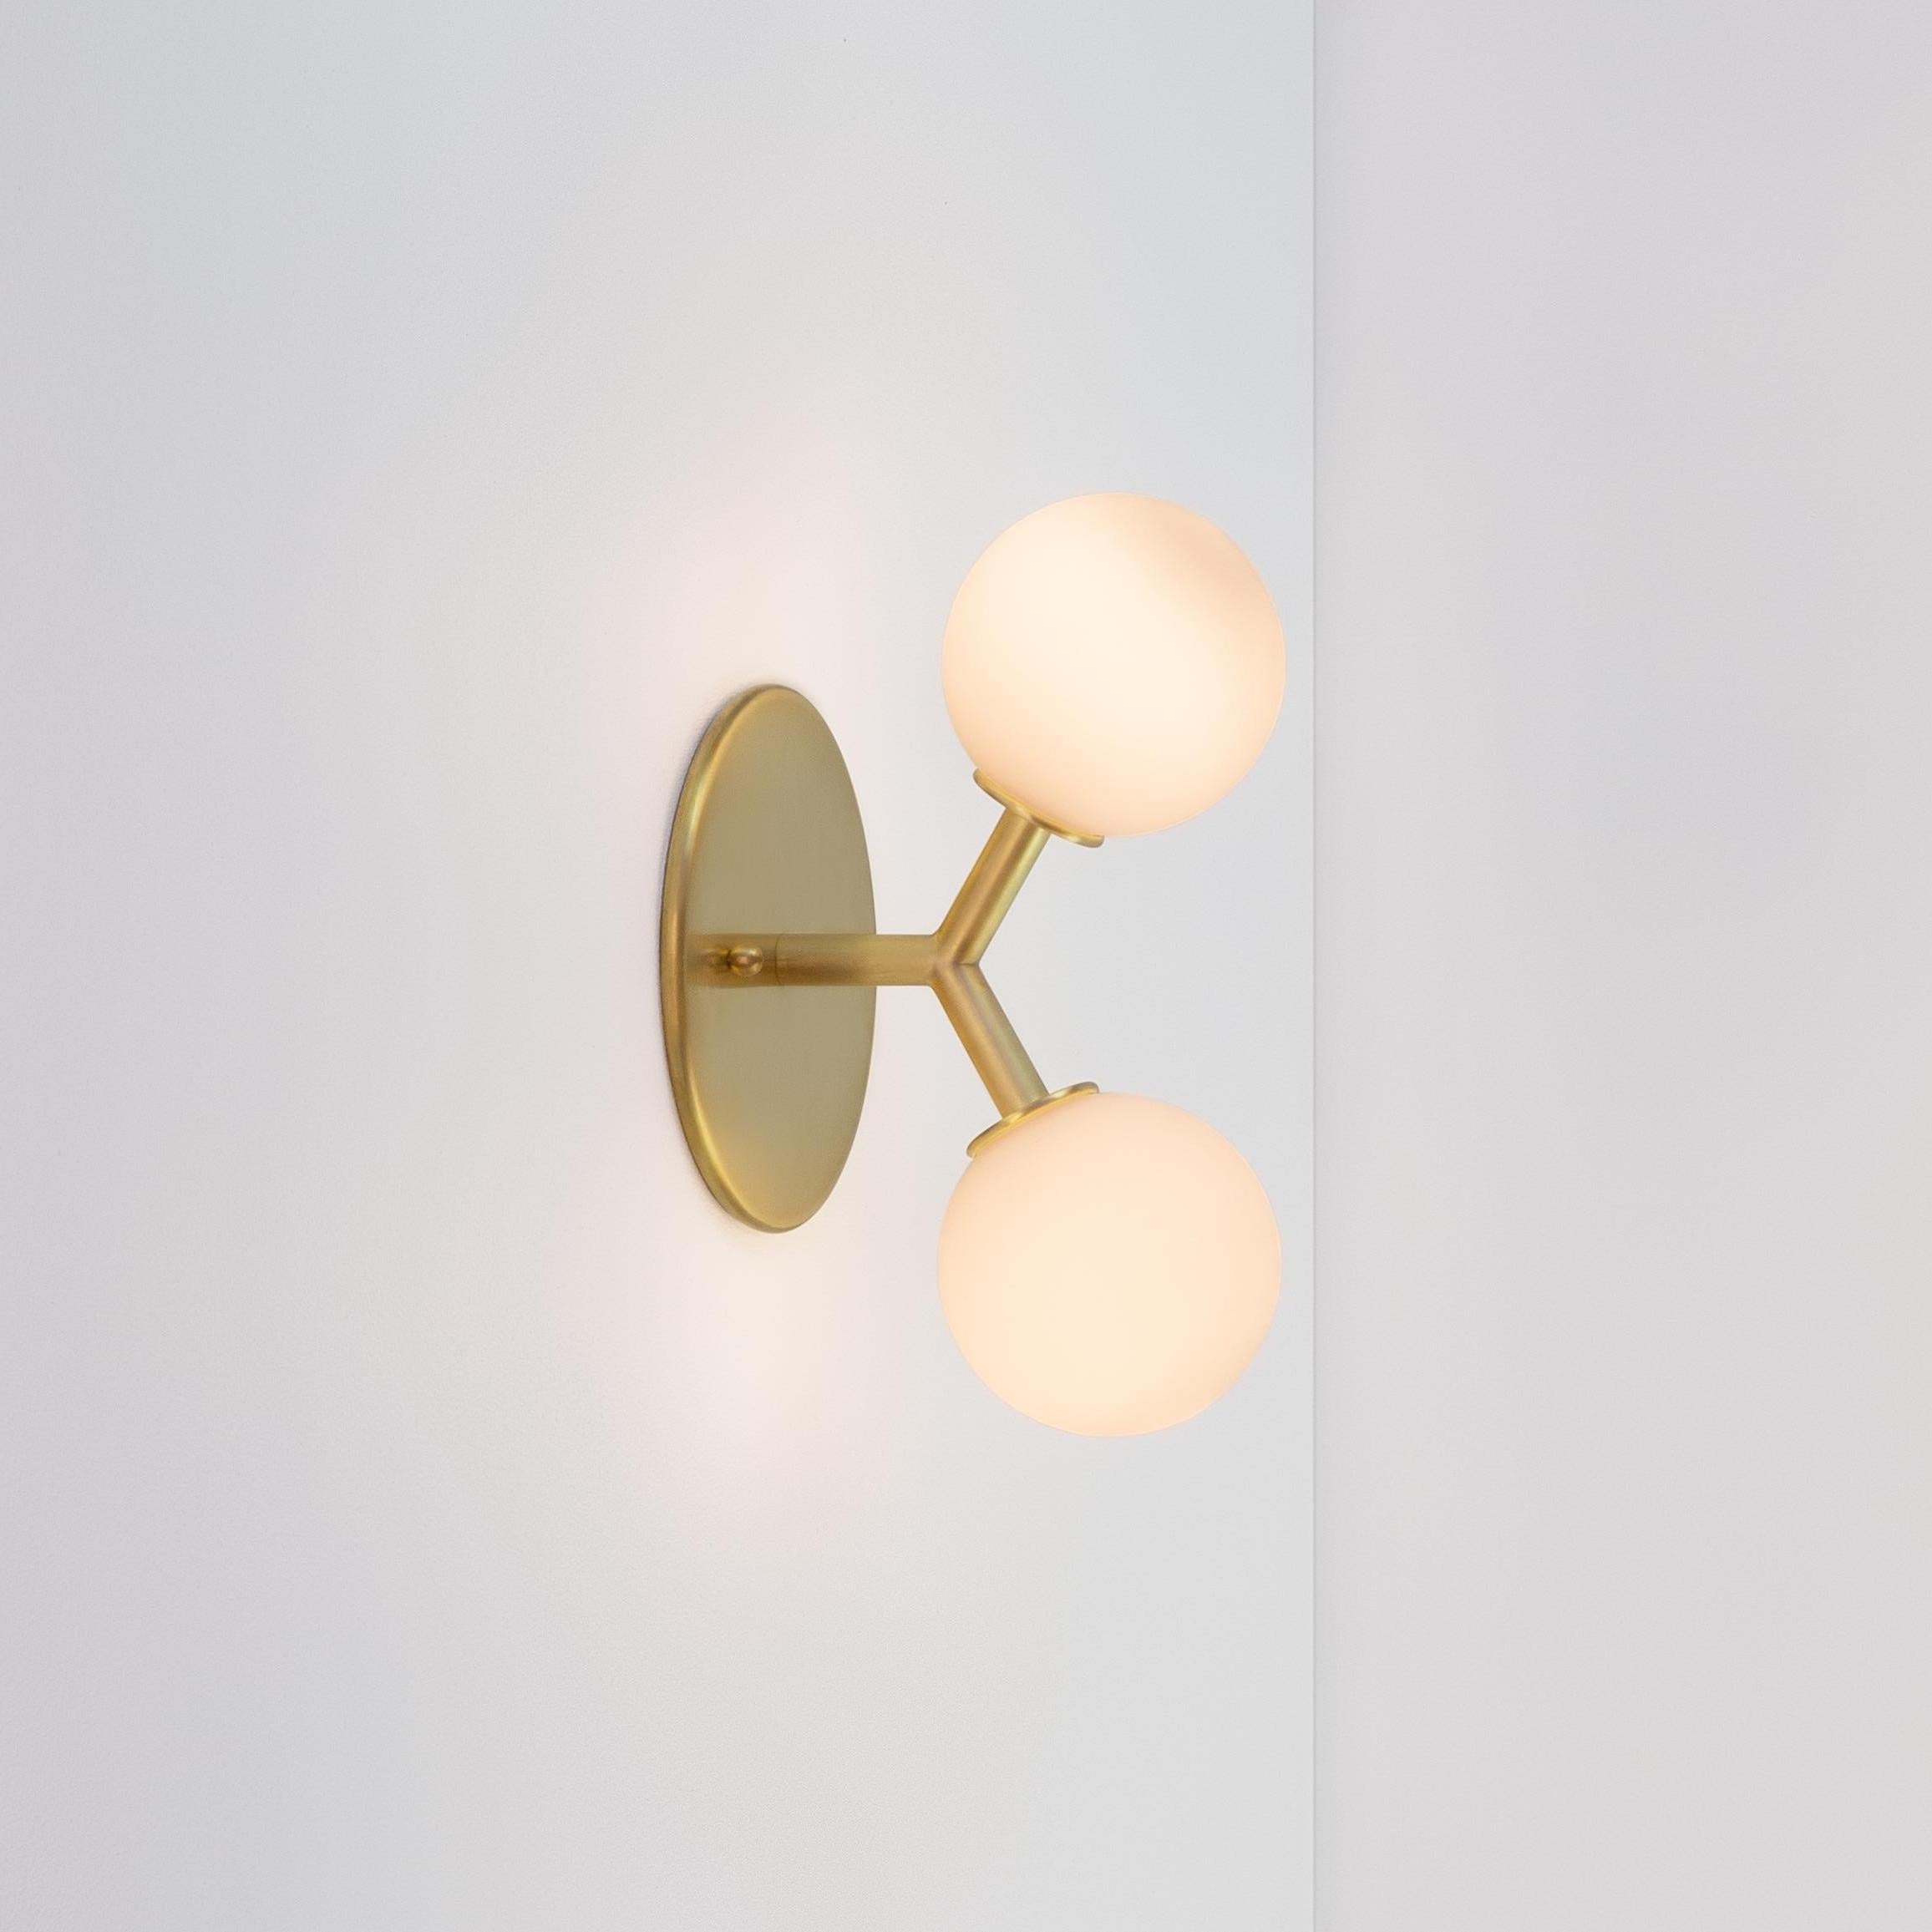 This listing is for 1x Y sconce in brass designed and manufactured by RESEARCH Lighting.

Materials: brass & glass
Finish: raw brushed brass 
Electronics: 2x G9 Socket, 2x 2.5 Watt LED Bulbs (included), 500 Lumens total
UL Listed. Made in the USA.